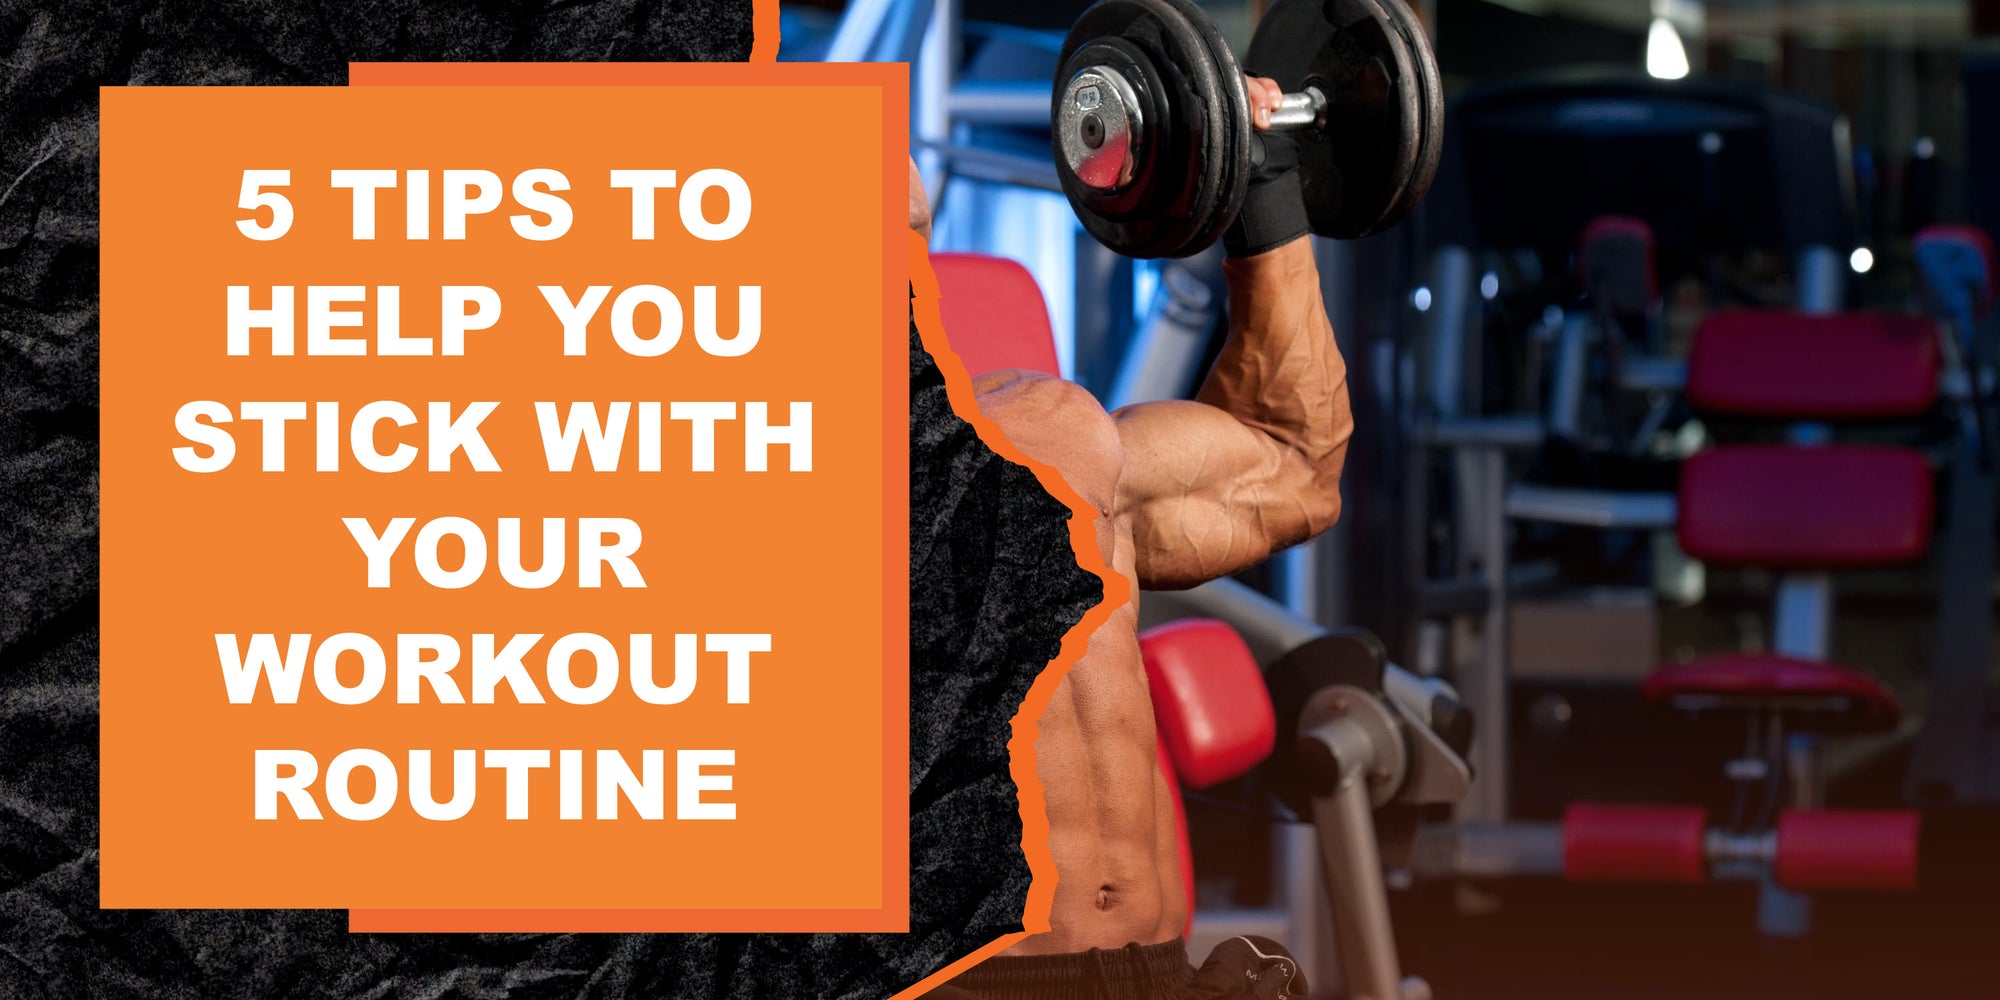 5 Tips to Help You Stick With Your Workout Routine